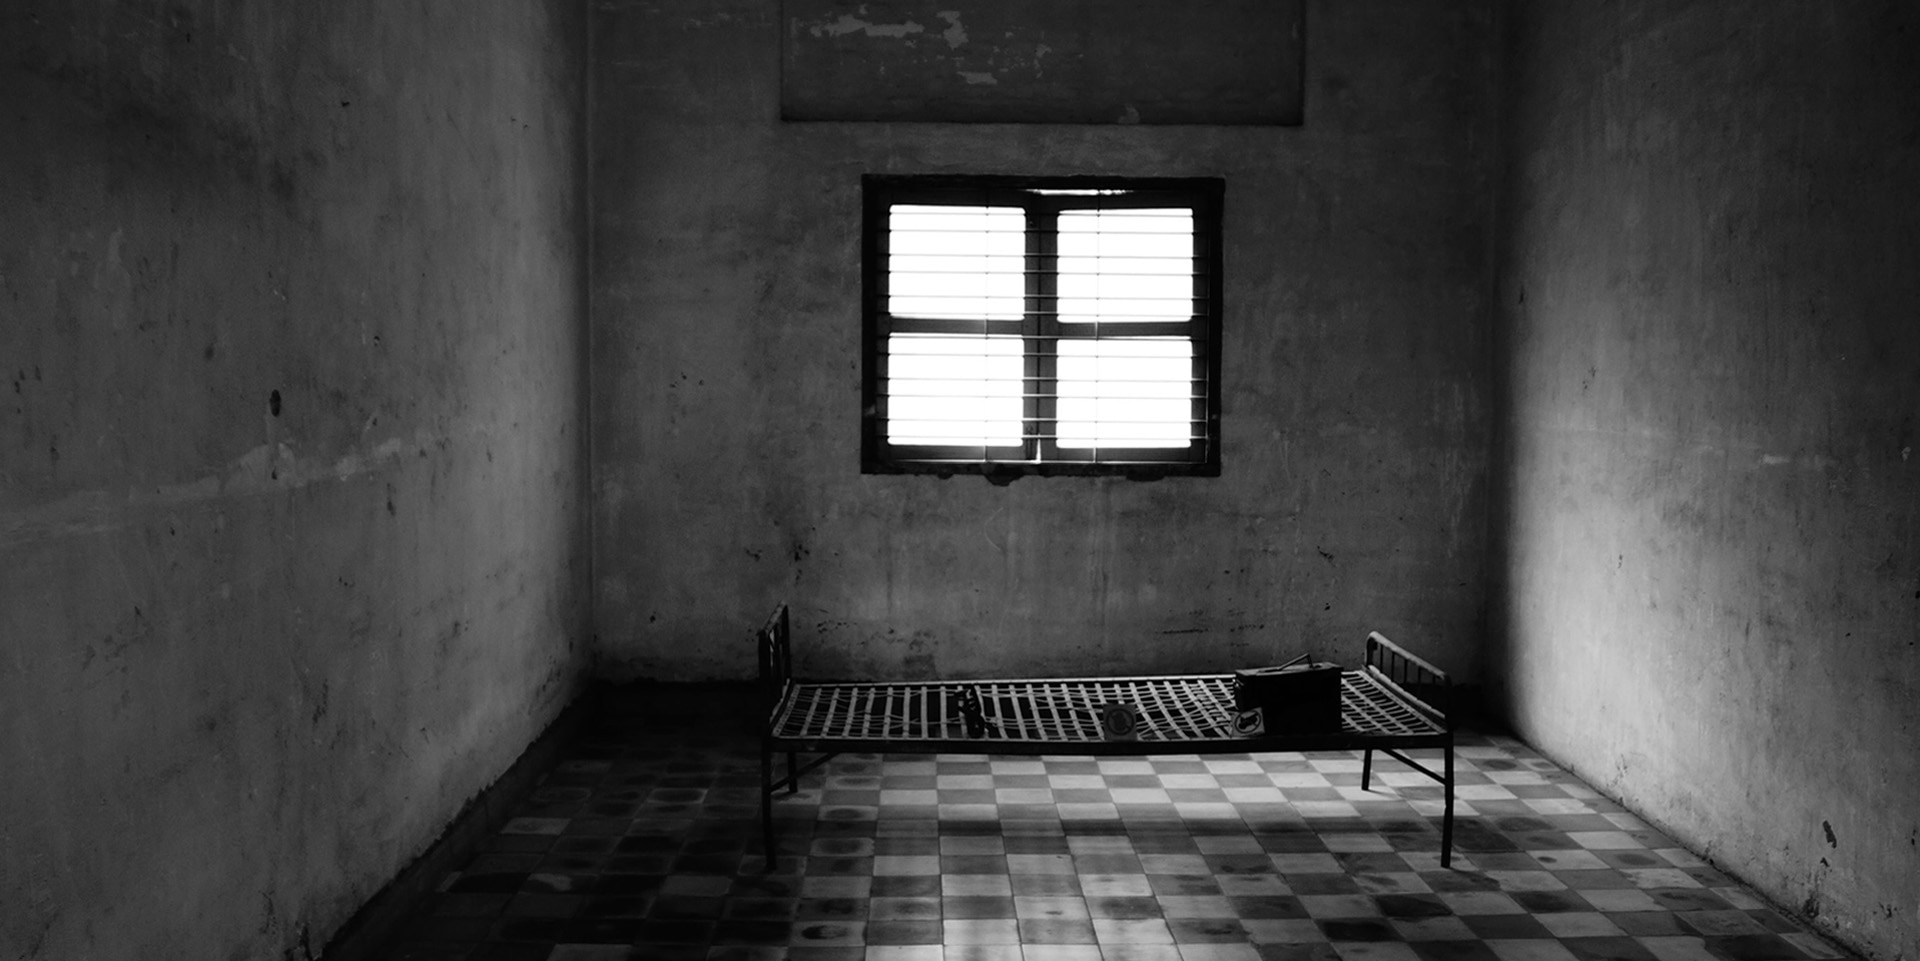 The picture shows a cell with a window and a bed frame in black and white.